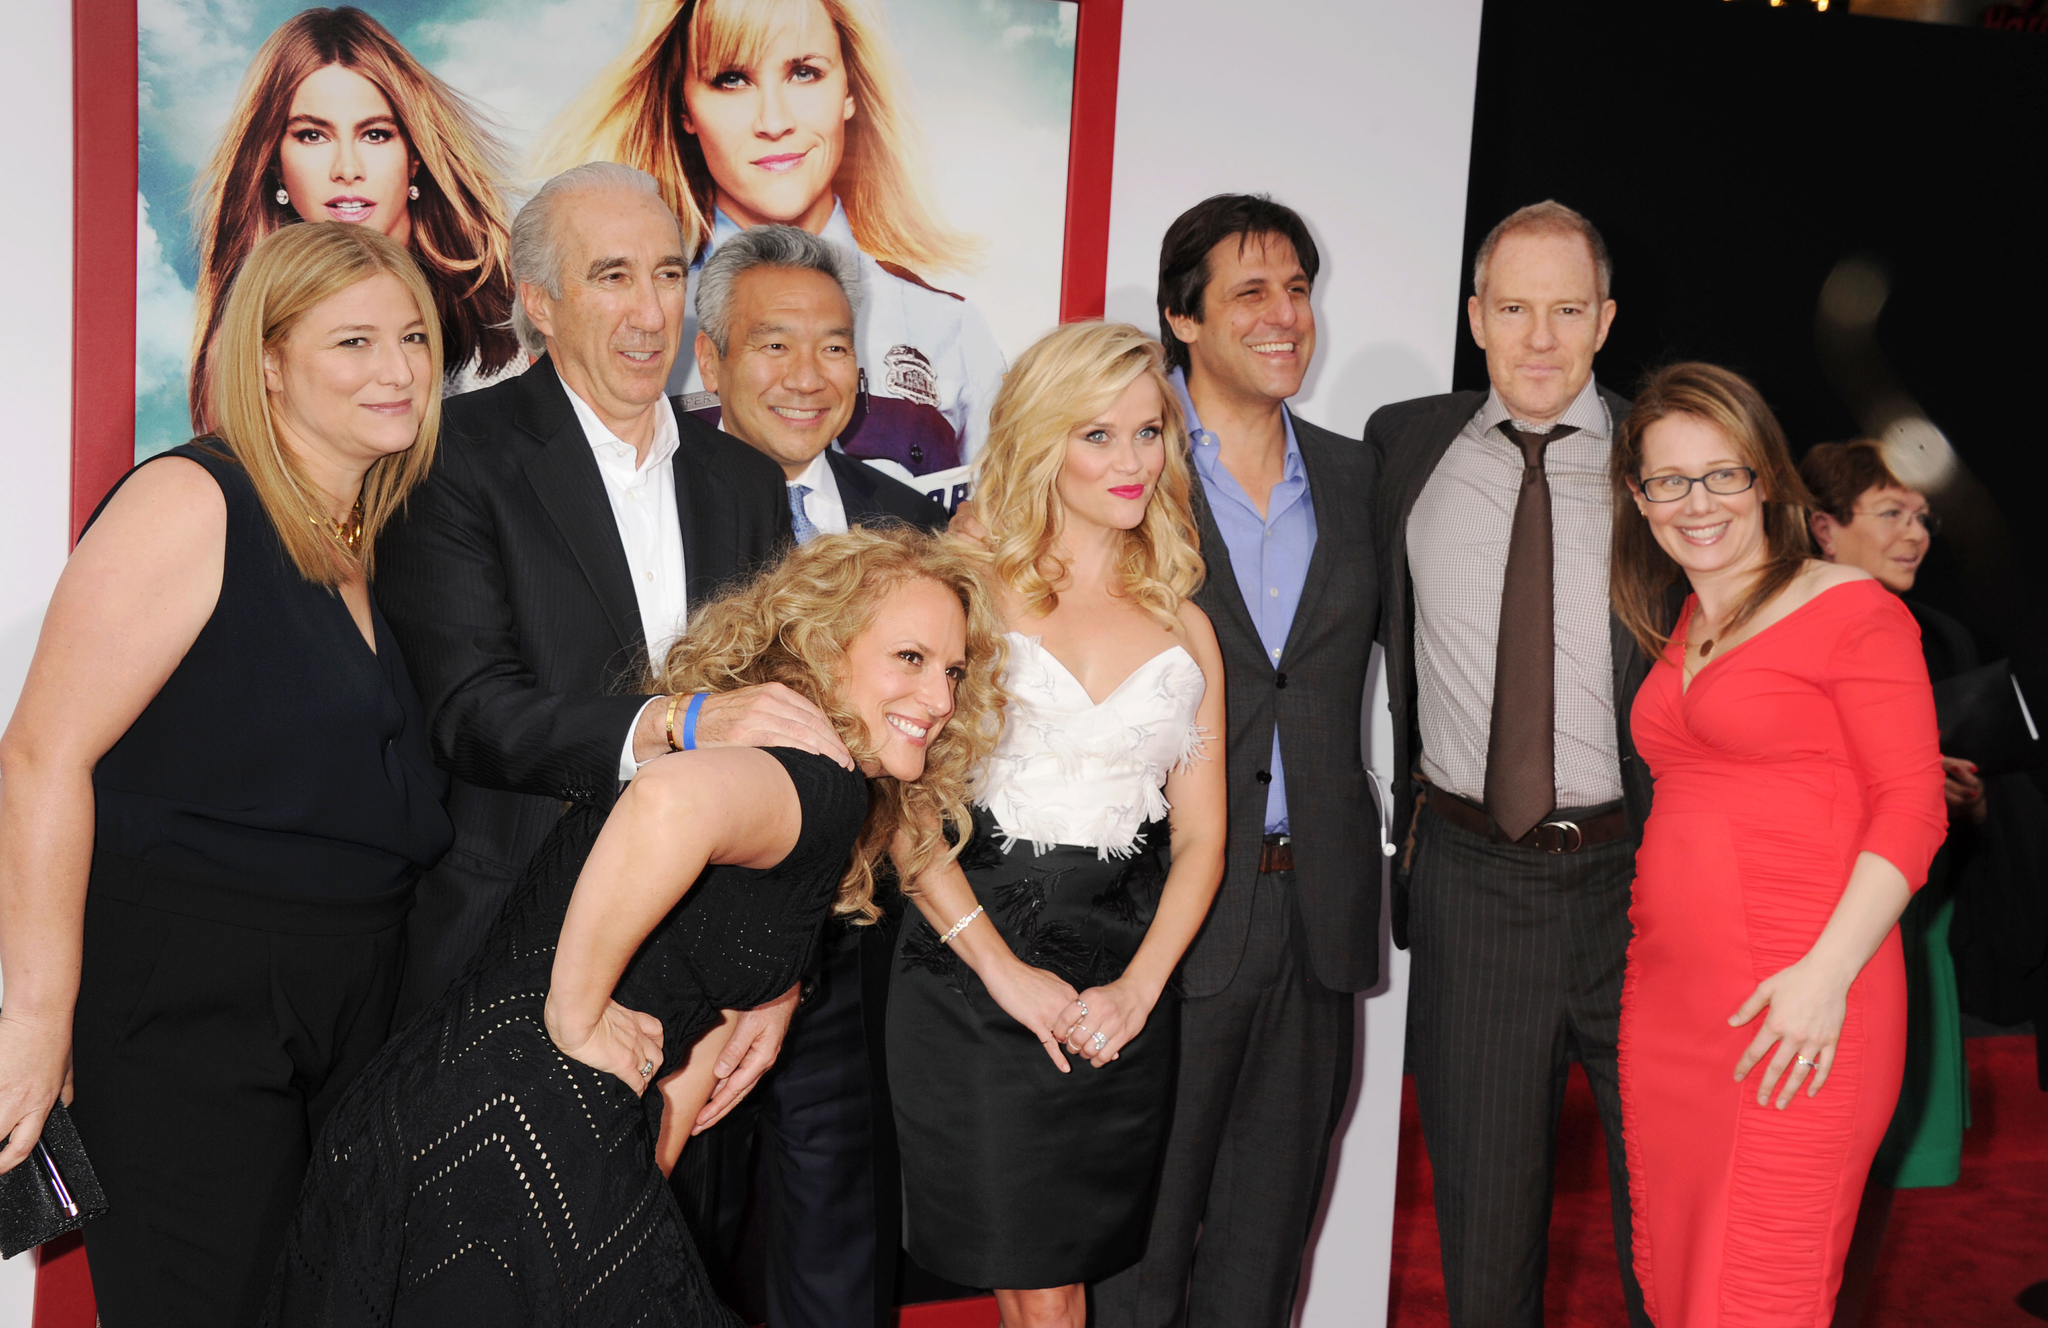 Reese Witherspoon, Gary Barber, Toby Emmerich, Anne Fletcher, Jonathan Glickman, Bruna Papandrea, Dana Fox and Kevin Tsujihara at event of Karstos gaudynes (2015)